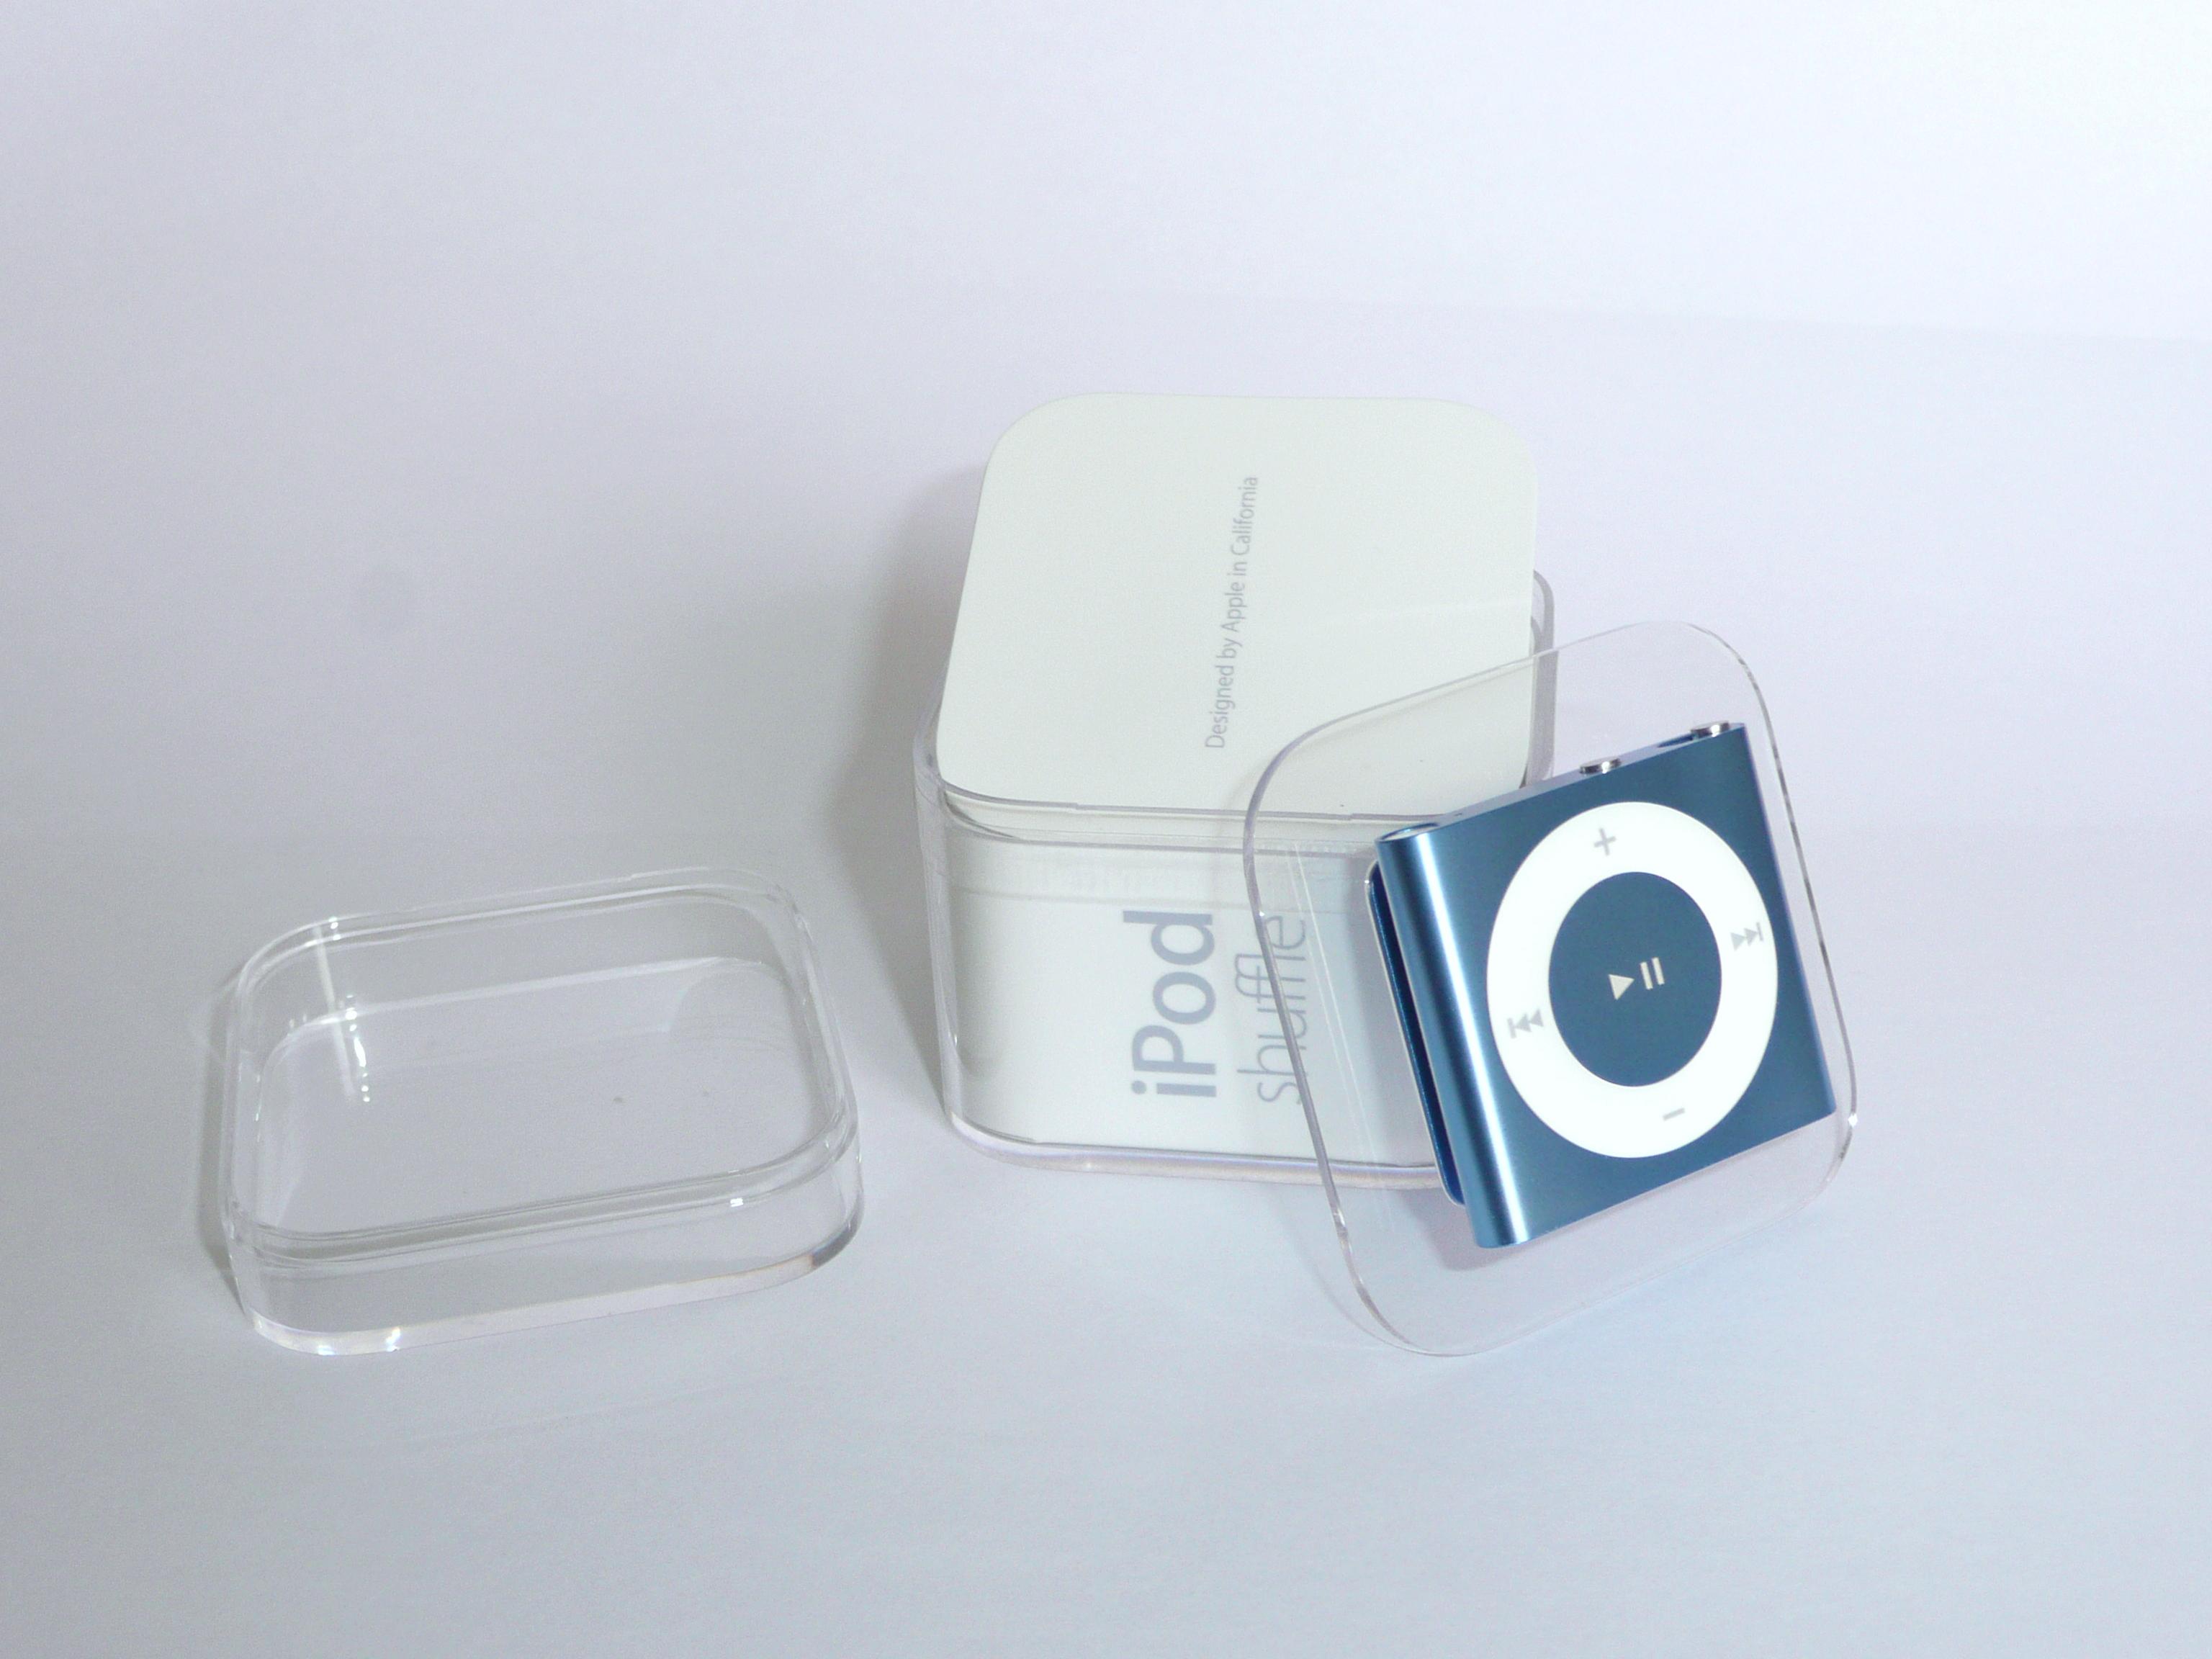 Getting Started with Your iPod Shuffle